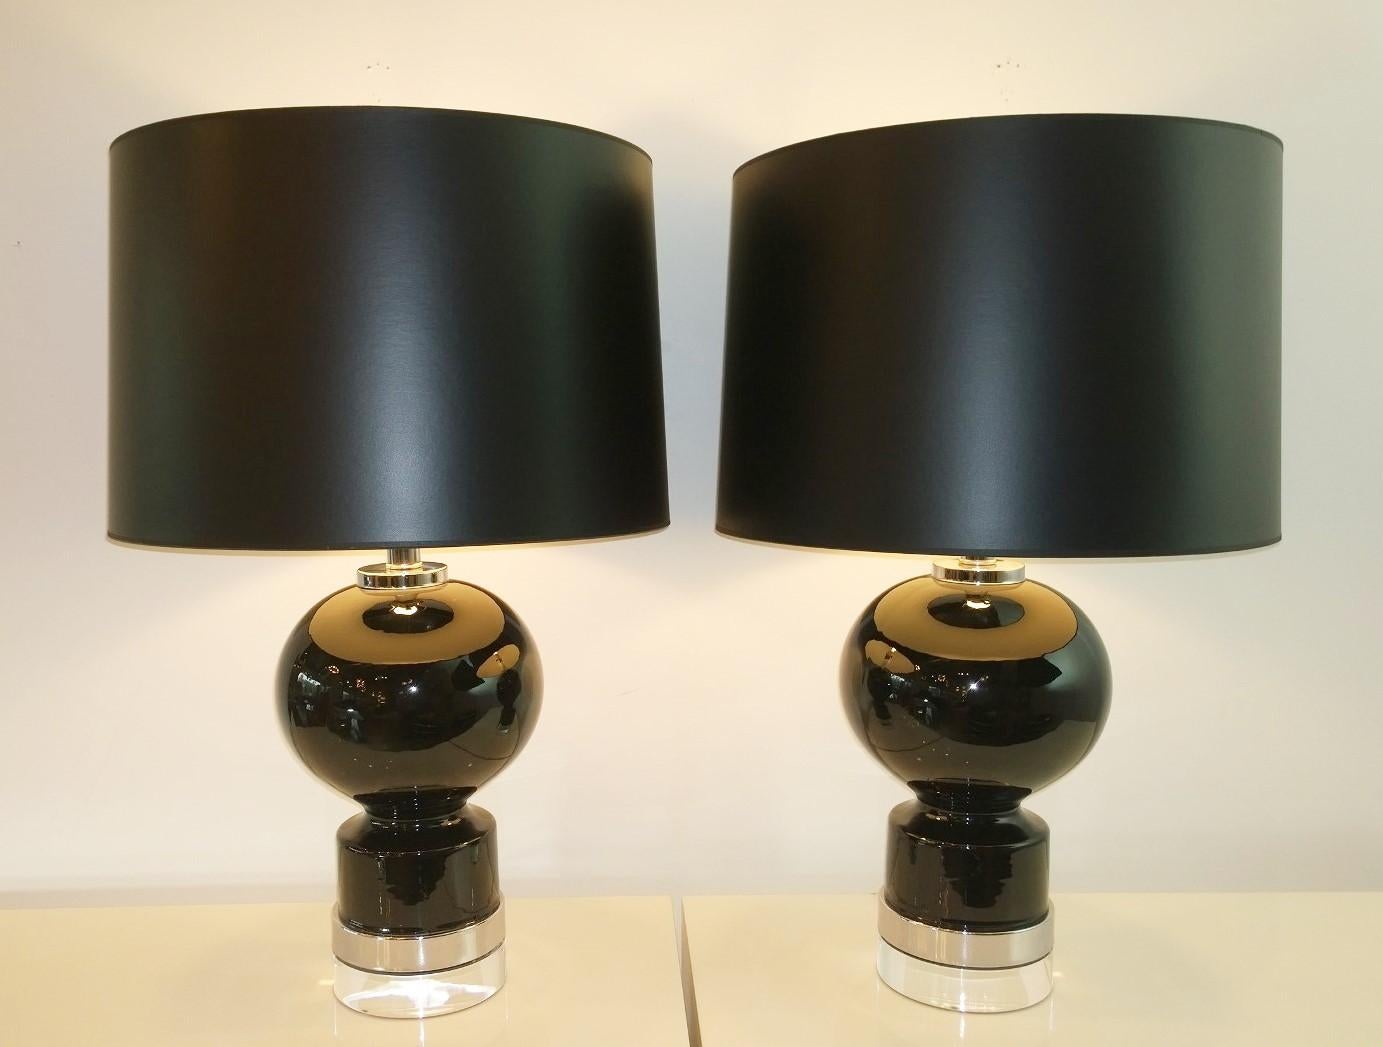 Pair of Black Glazed Ceramic Table Lamps with Chrome Plate and Lucite Bases In Good Condition For Sale In Houston, TX